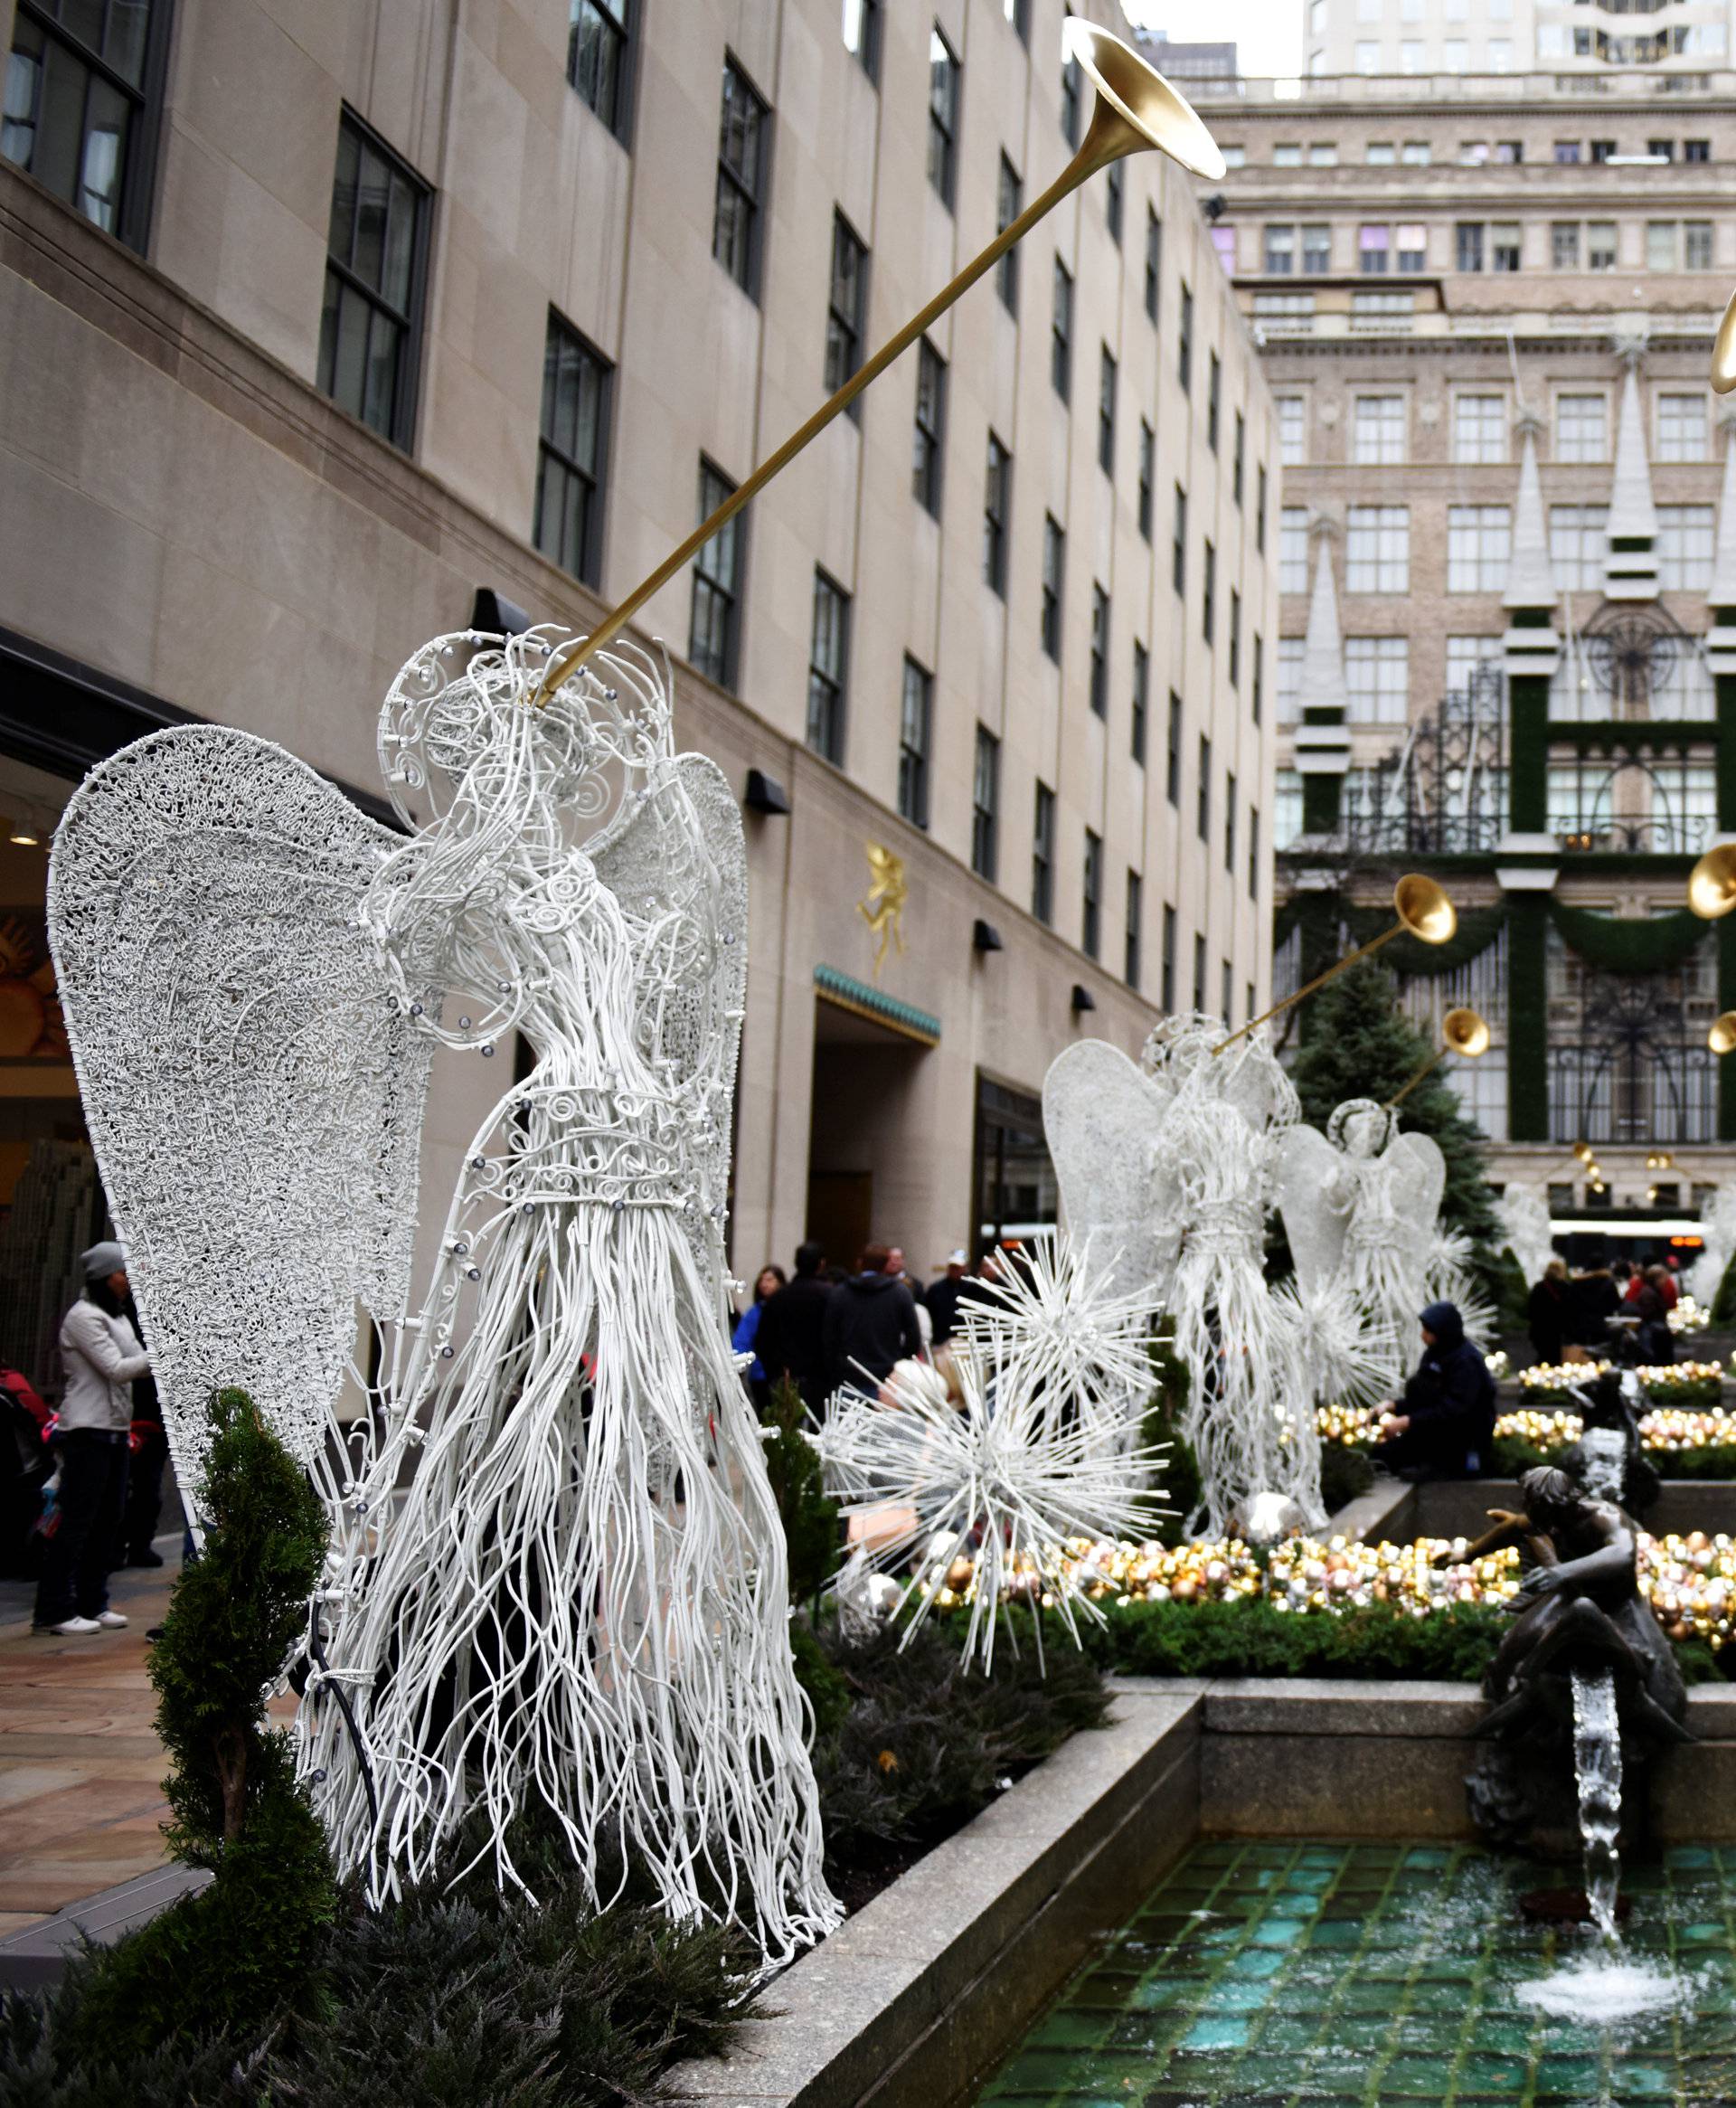 A worker adjusts a holiday installation at Rockefeller Center along Fifth Avenue in the Manhattan borough of New York